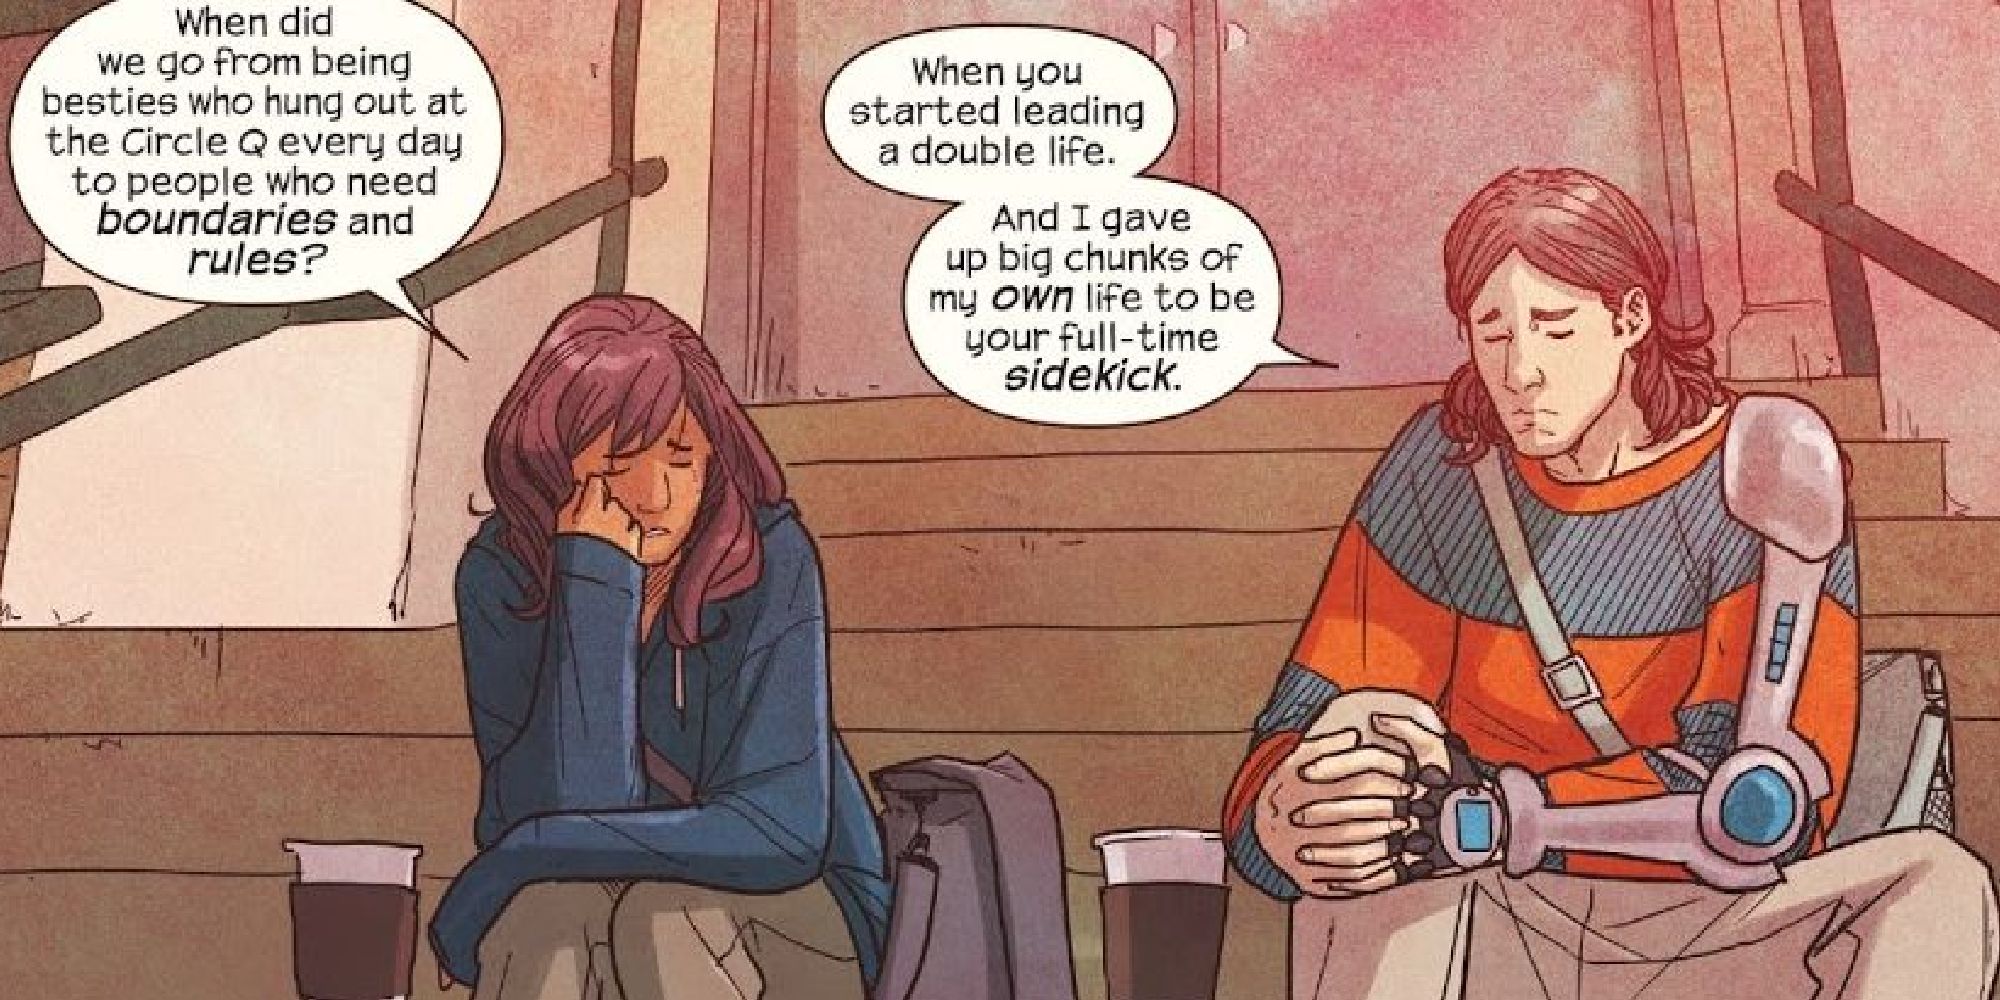 Kamala sitting next to Bruno and his robotic arm in the comics